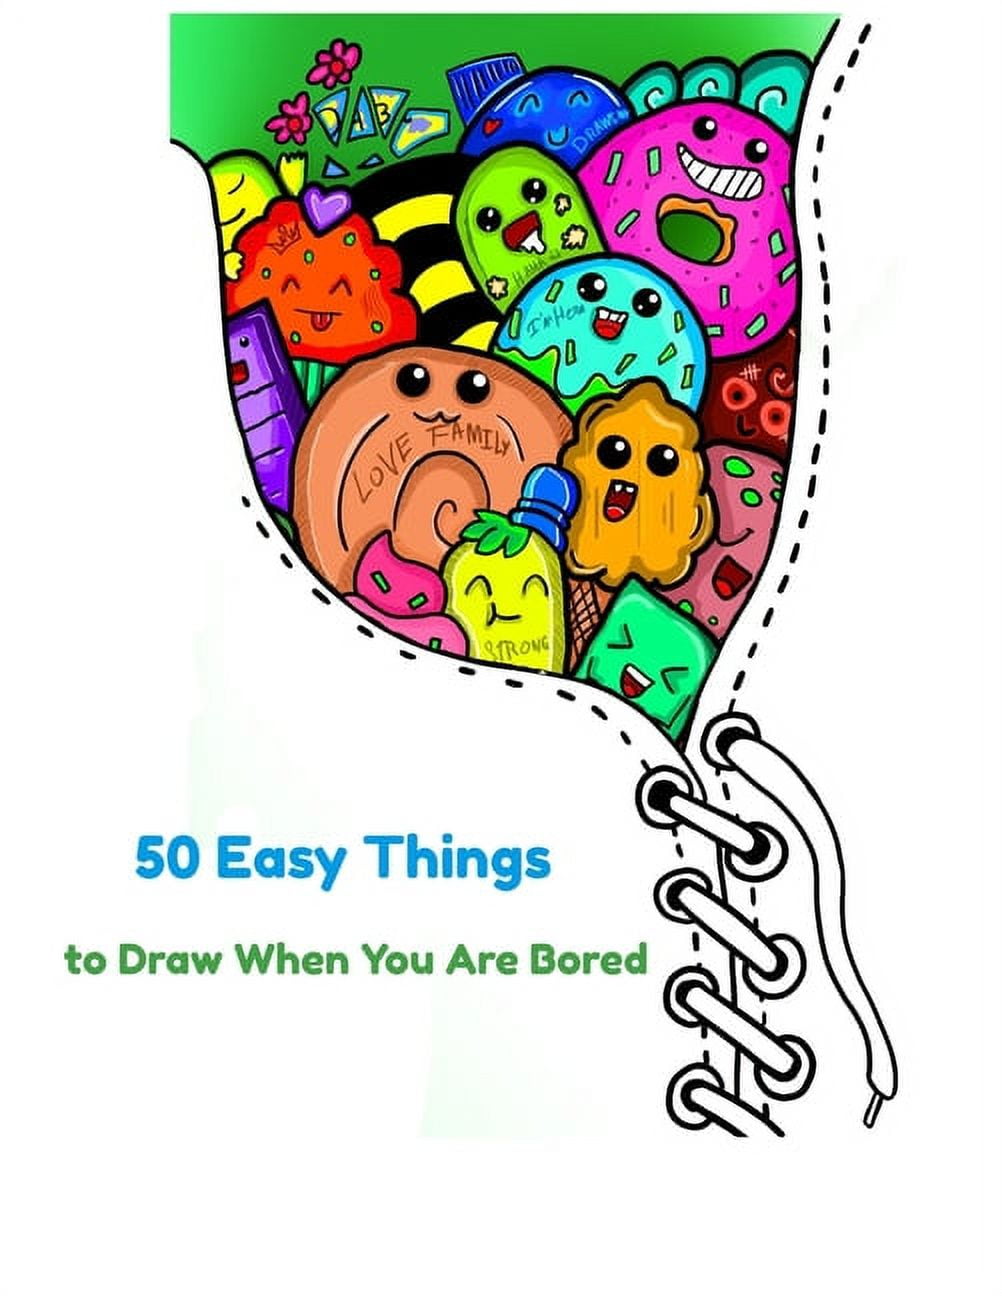 52 Things to Do When You Are Bored